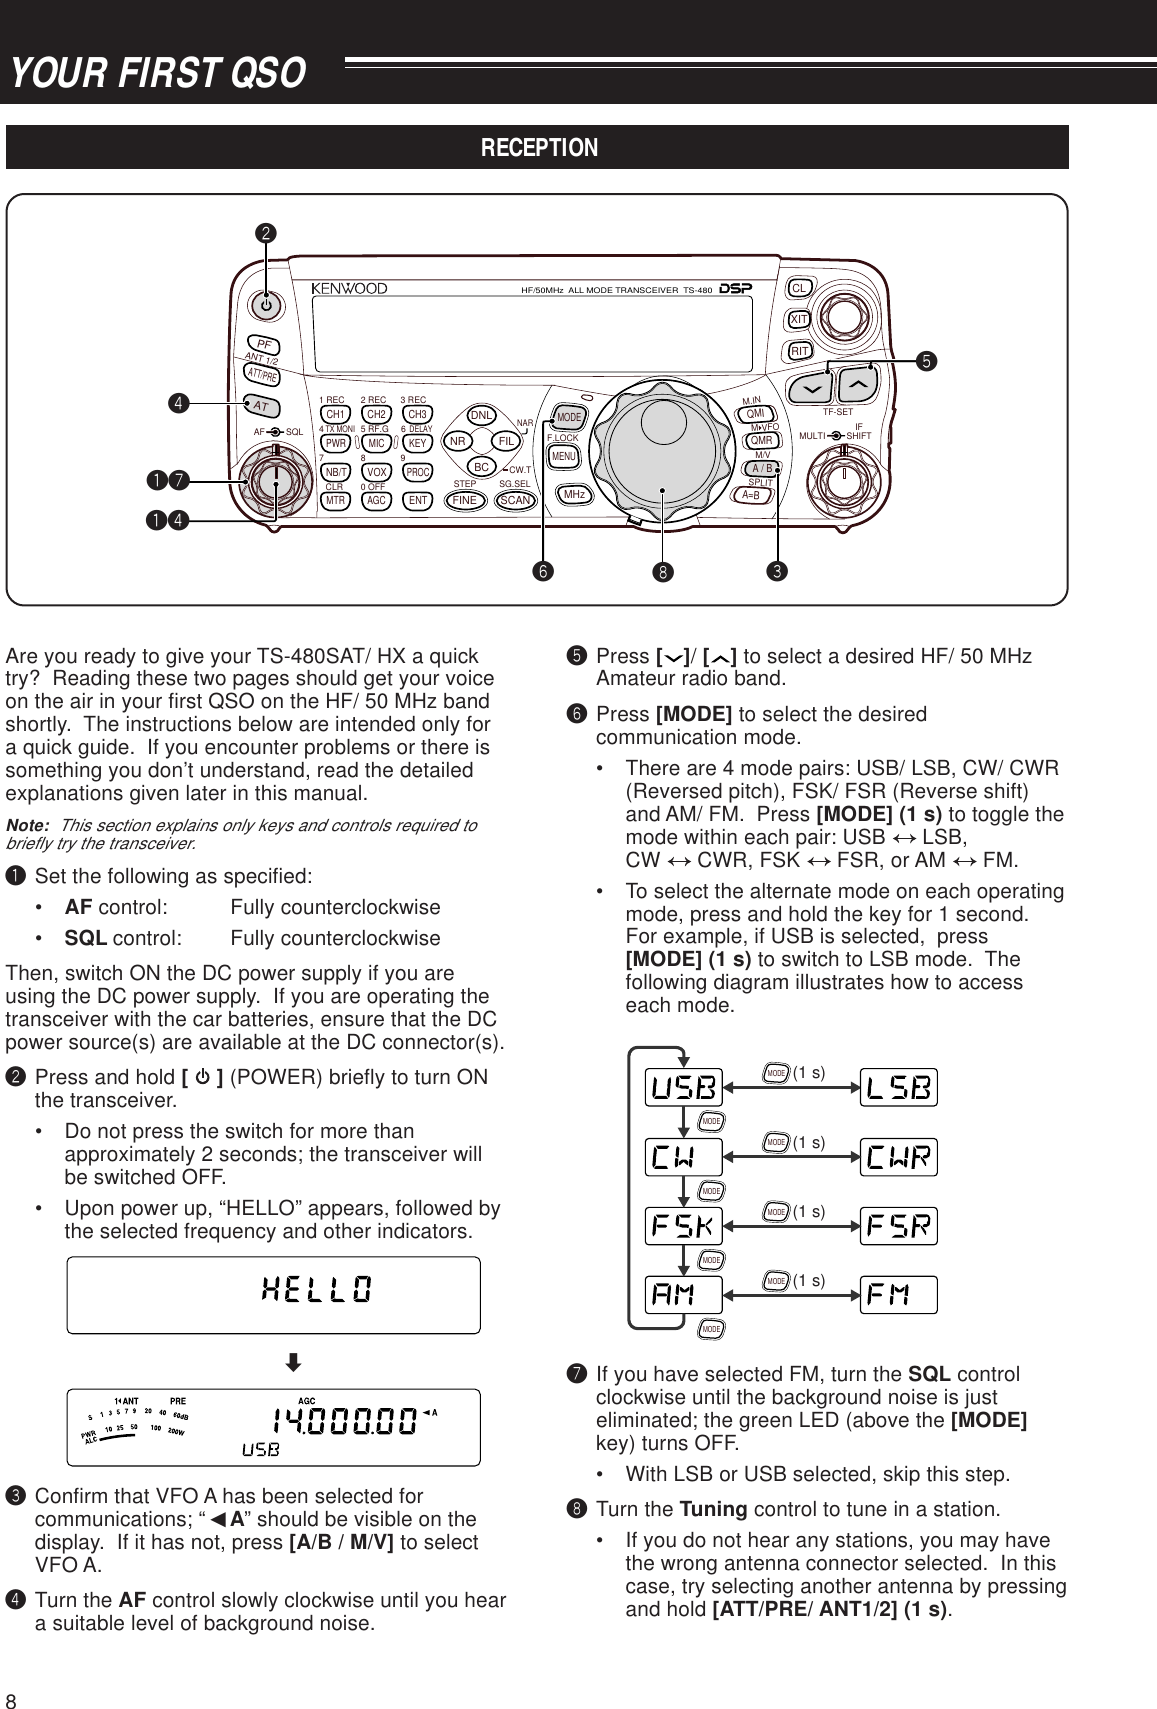 8YOUR FIRST QSOAre you ready to give your TS-480SAT/ HX a quicktry?  Reading these two pages should get your voiceon the air in your first QSO on the HF/ 50 MHz bandshortly.  The instructions below are intended only fora quick guide.  If you encounter problems or there issomething you don’t understand, read the detailedexplanations given later in this manual.Note:  This section explains only keys and controls required tobriefly try the transceiver.qSet the following as specified:•AF control: Fully counterclockwise•SQL control: Fully counterclockwiseThen, switch ON the DC power supply if you areusing the DC power supply.  If you are operating thetransceiver with the car batteries, ensure that the DCpower source(s) are available at the DC connector(s).wPress and hold [   ] (POWER) briefly to turn ONthe transceiver.• Do not press the switch for more thanapproximately 2 seconds; the transceiver willbe switched OFF.• Upon power up, “HELLO” appears, followed bythe selected frequency and other indicators.deConfirm that VFO A has been selected forcommunications; “tA” should be visible on thedisplay.  If it has not, press [A/B / M/V] to selectVFO A.rTurn the AF control slowly clockwise until you heara suitable level of background noise.tPress [ ]/ [ ] to select a desired HF/ 50 MHzAmateur radio band.yPress [MODE] to select the desiredcommunication mode.• There are 4 mode pairs: USB/ LSB, CW/ CWR(Reversed pitch), FSK/ FSR (Reverse shift)and AM/ FM.  Press [MODE] (1 s) to toggle themode within each pair: USB   LSB,CW   CWR, FSK   FSR, or AM   FM.• To select the alternate mode on each operatingmode, press and hold the key for 1 second.For example, if USB is selected,  press[MODE] (1 s) to switch to LSB mode.  Thefollowing diagram illustrates how to accesseach mode.MODEMODEMODEMODEMODE(1 s)MODE(1 s)MODE(1 s)MODE(1 s)uIf you have selected FM, turn the SQL controlclockwise until the background noise is justeliminated; the green LED (above the [MODE]key) turns OFF.• With LSB or USB selected, skip this step.iTurn the Tuning control to tune in a station.• If you do not hear any stations, you may havethe wrong antenna connector selected.  In thiscase, try selecting another antenna by pressingand hold [ATT/PRE/ ANT1/2] (1 s).NAR1 REC 2 REC5 RF.G0 OFF83 REC947TX MONI6DELAYHF/50MHz  ALL MODE TRANSCEIVER  TS-480CLR STEP SG.SELCW.TF.LOCKM/VSPLITM VFOM.INTF-SETMULTI IFSHIFTAF SQLPFATCH1 CH2 CH3PWR MIC KEYVOXPROCAGCENTA / BA=BMODEMHzQMIQMRMENUMTRNB/TANT 1/2FINE SCANDNLBCNR FILRITXITCLATT/PREeirquqrywtRECEPTION